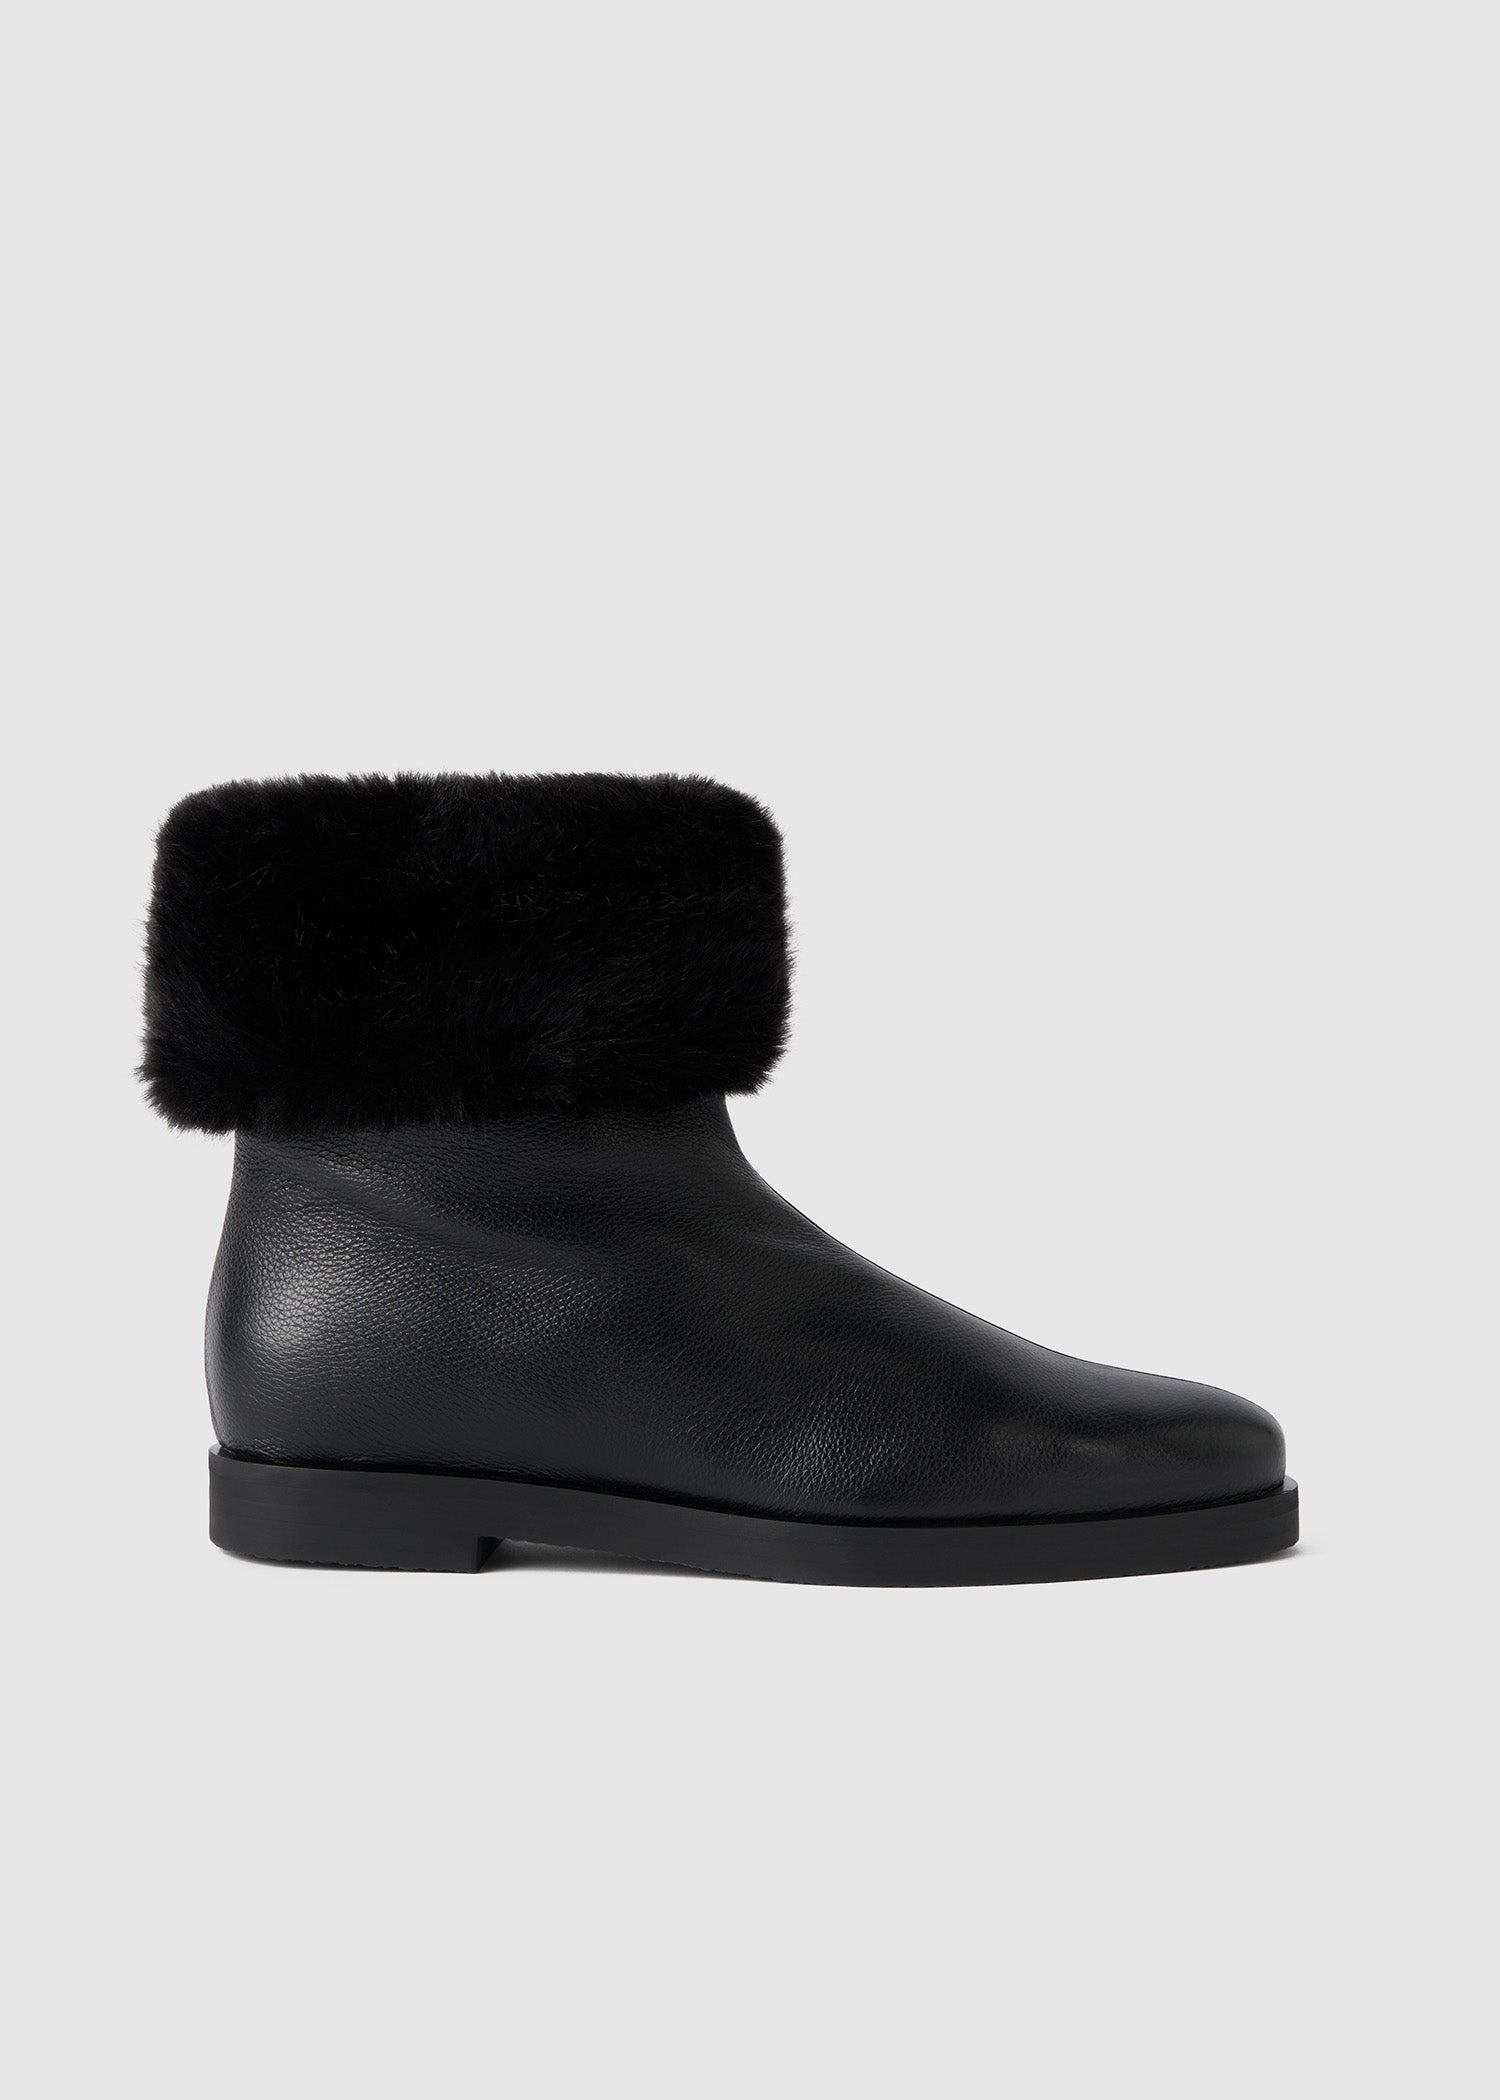 The Off-Duty Boot black - 8